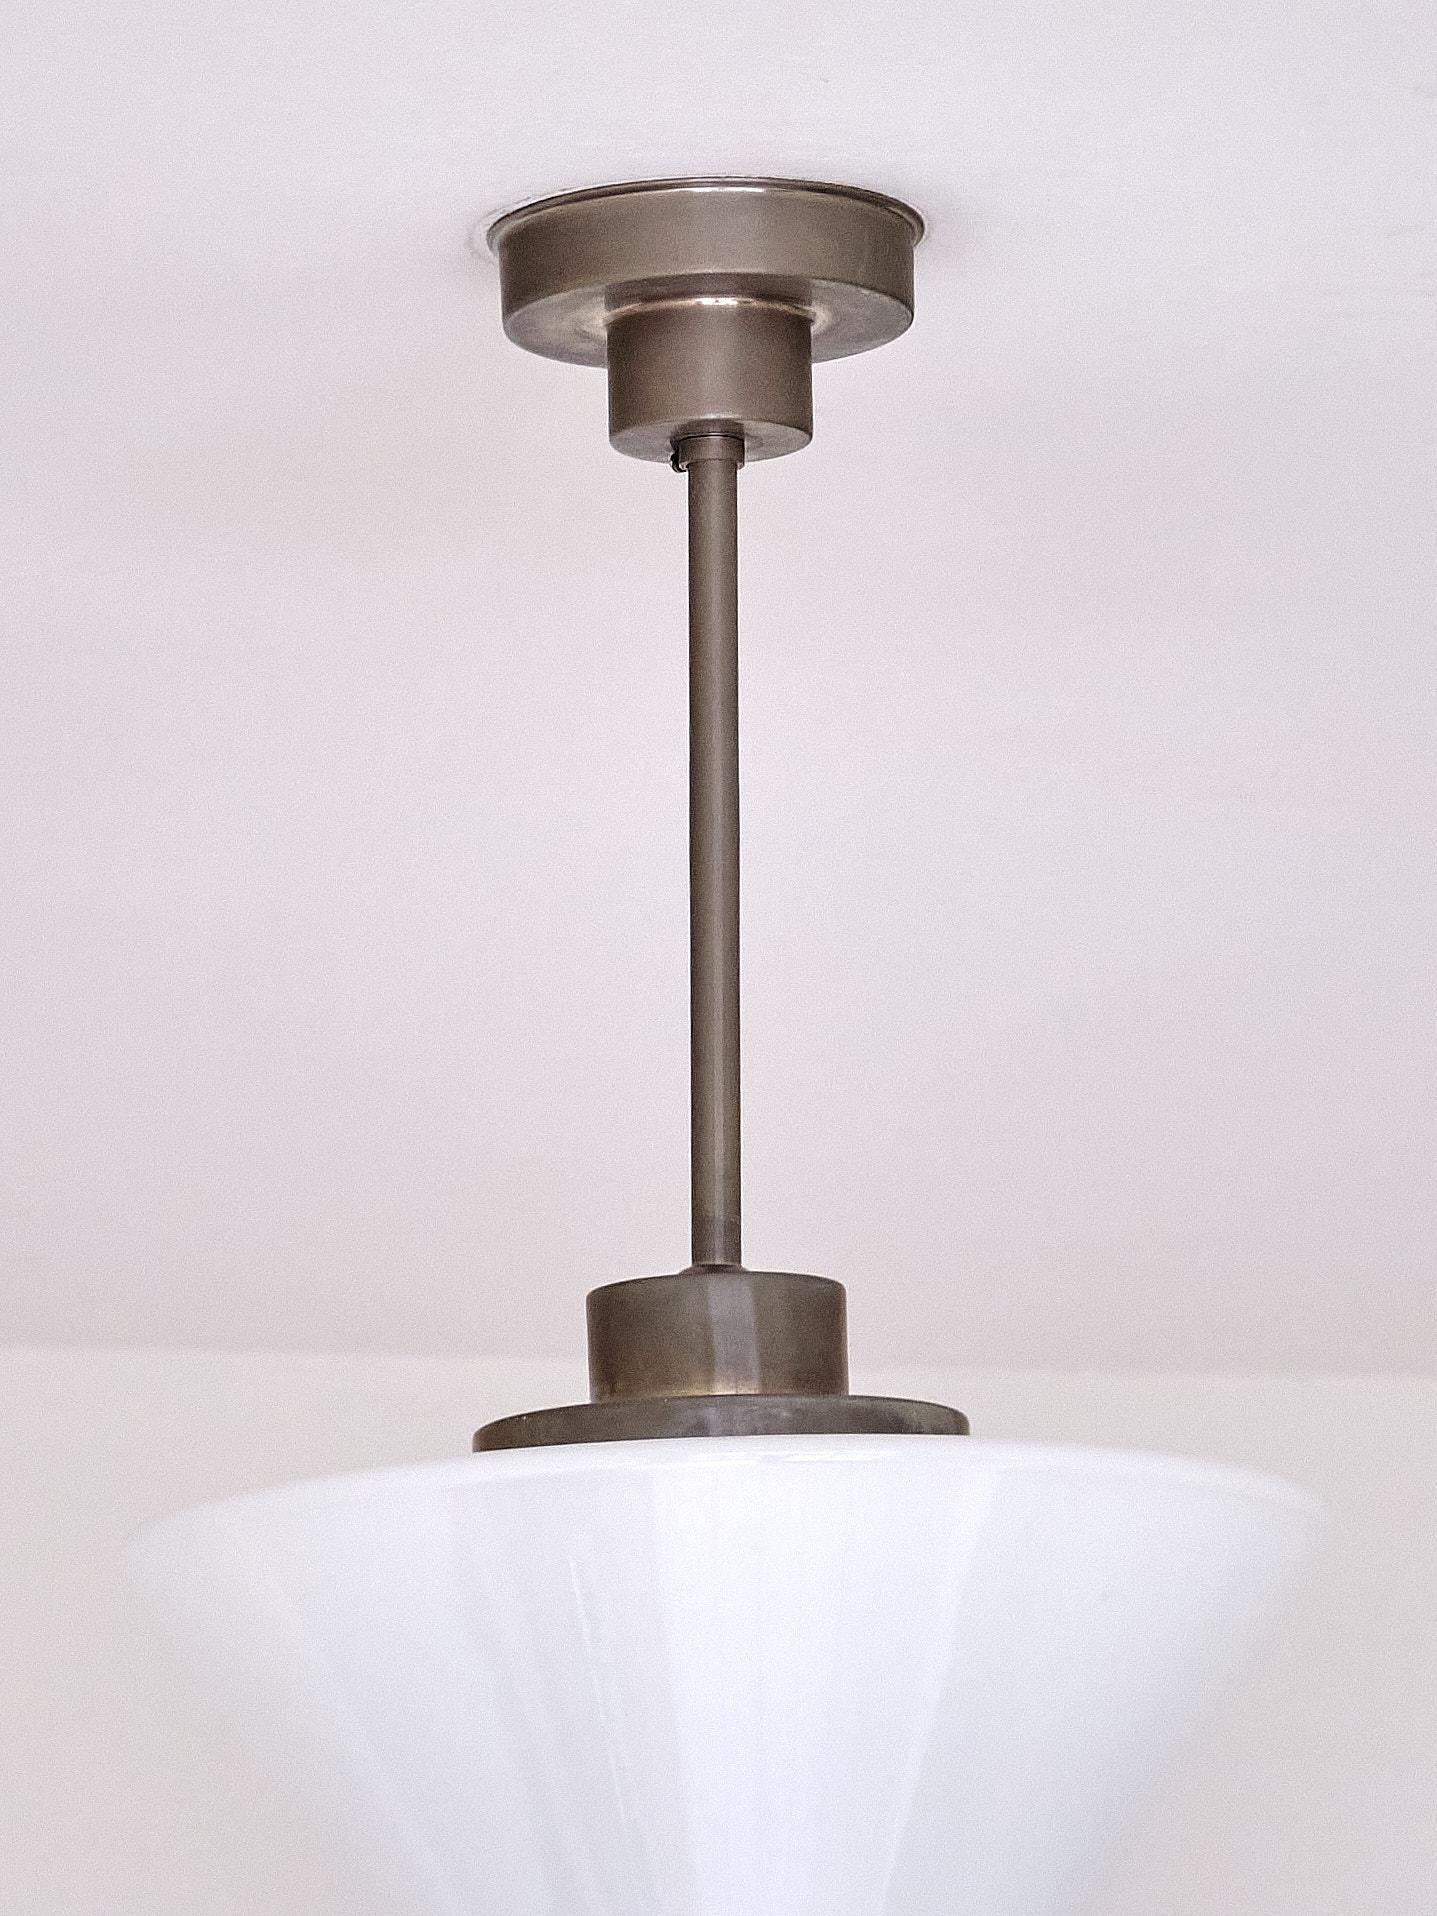 Gispen Cone Shaped Pendant Light in Opal Glass and Nickel, Netherlands, 1930s For Sale 1